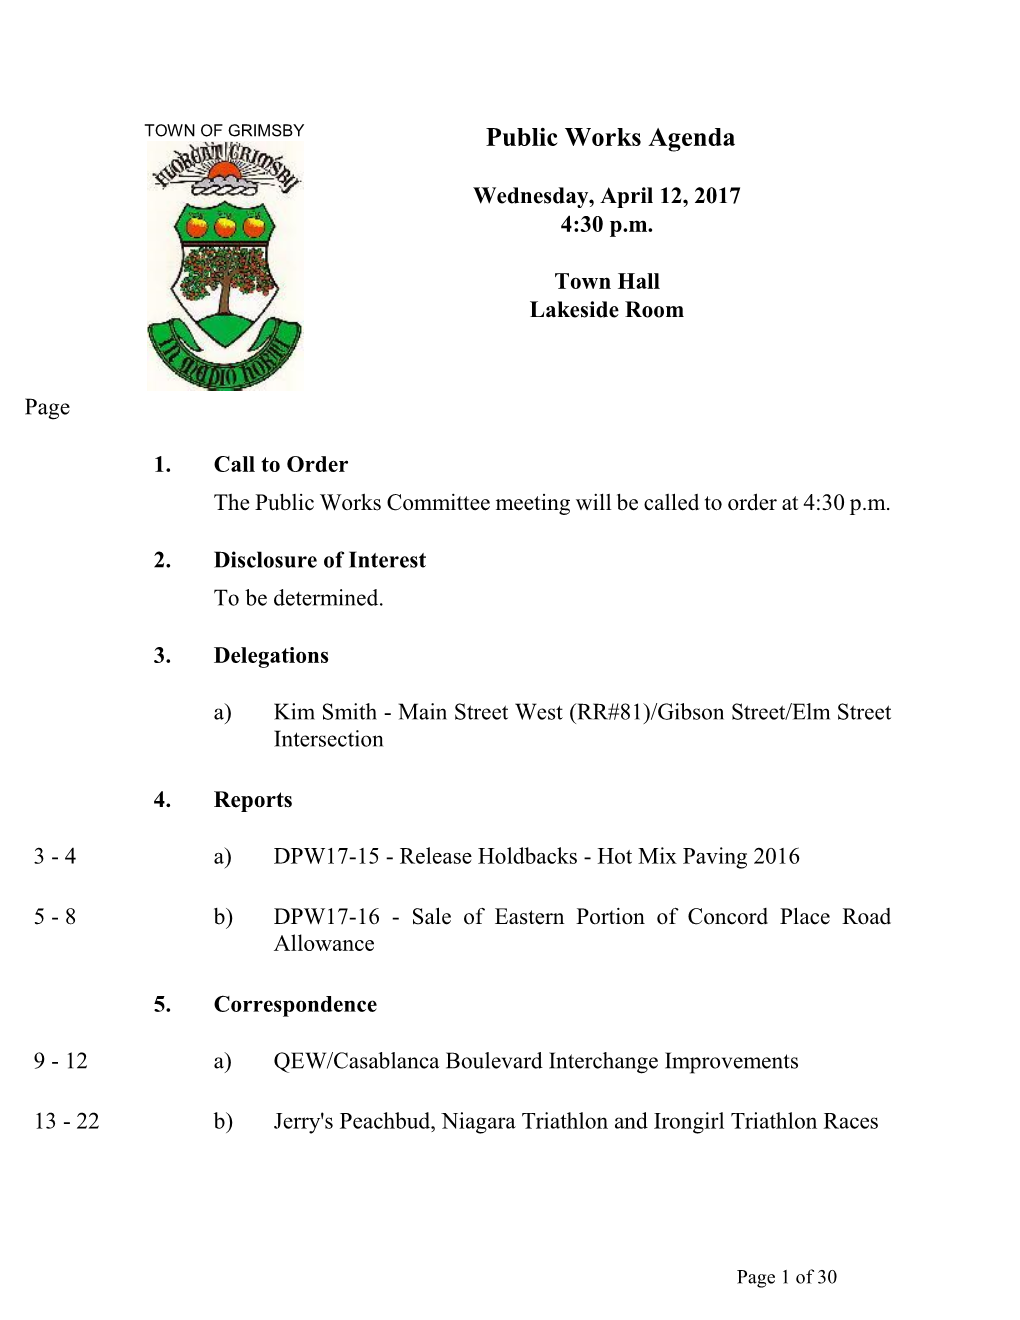 Public Works Committee Meeting Will Be Called to Order at 4:30 P.M